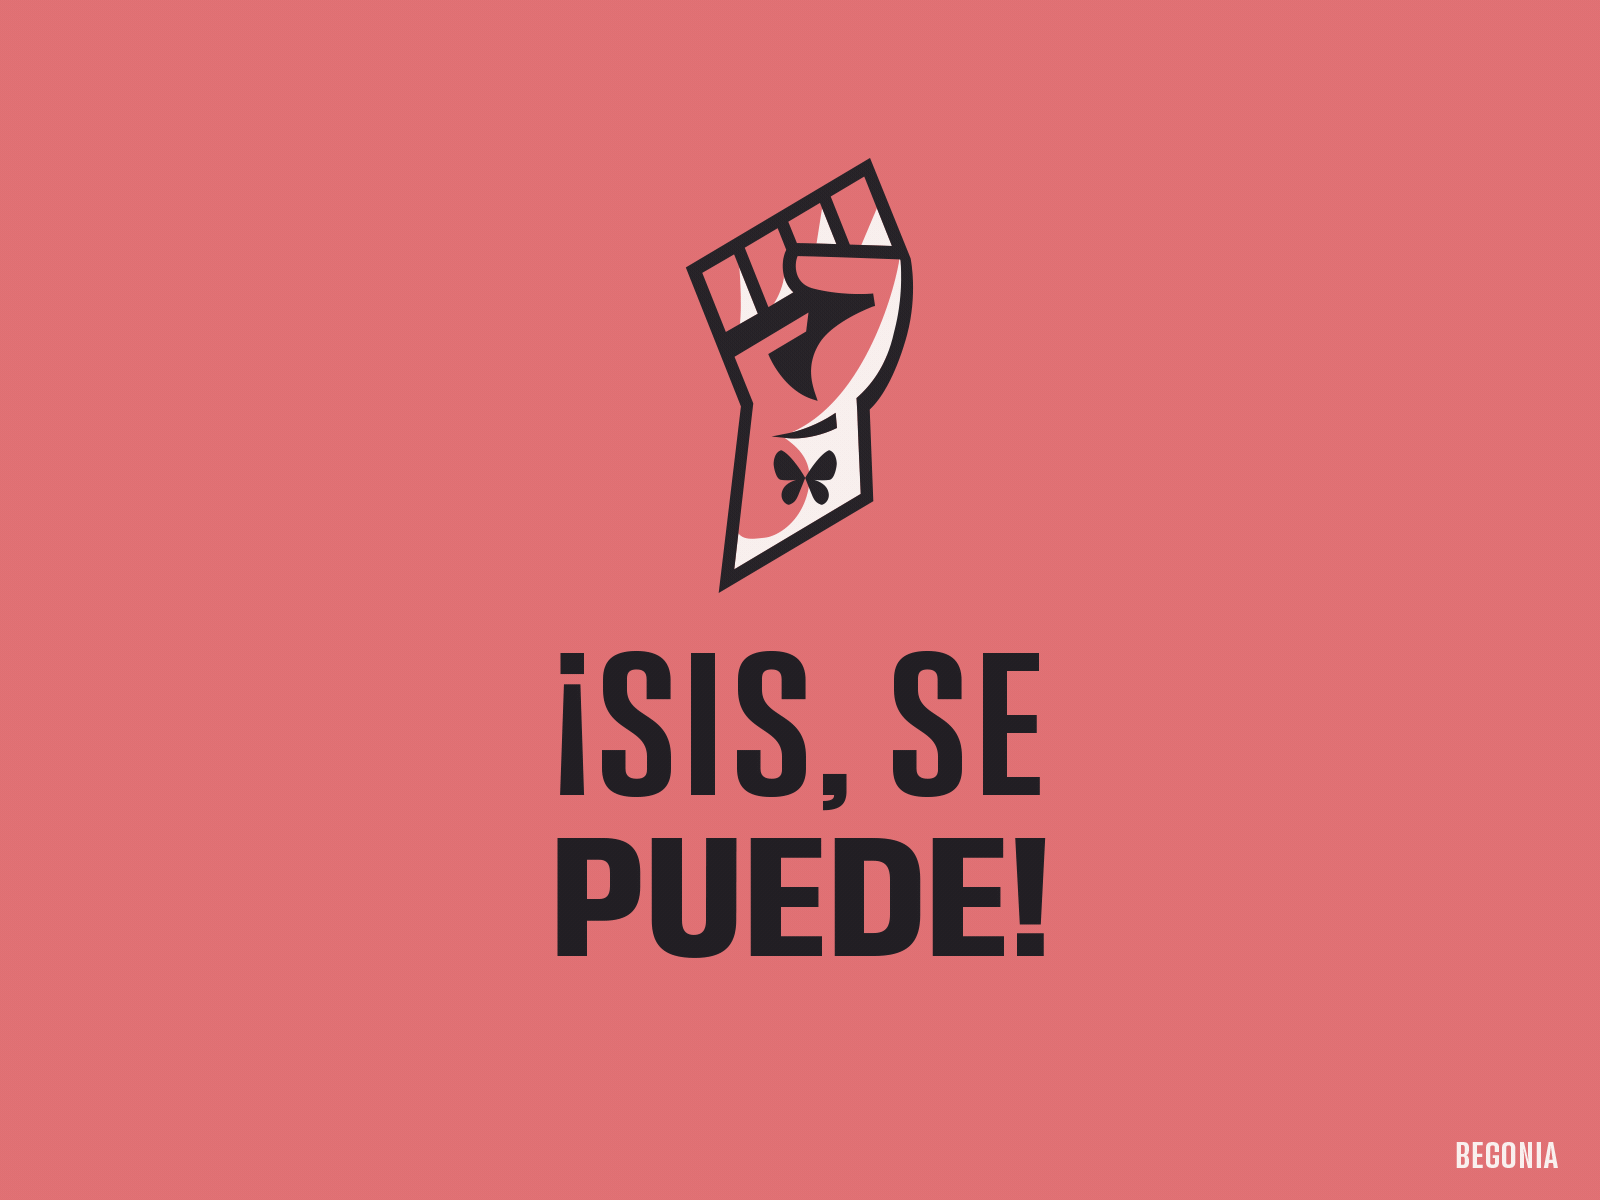 For and by the People! ¡Sis, se Puede! advocacy black branding brown icon identity design latin america latinotype latinx logo mark nonprofit protest symbol tampa bay washington dc